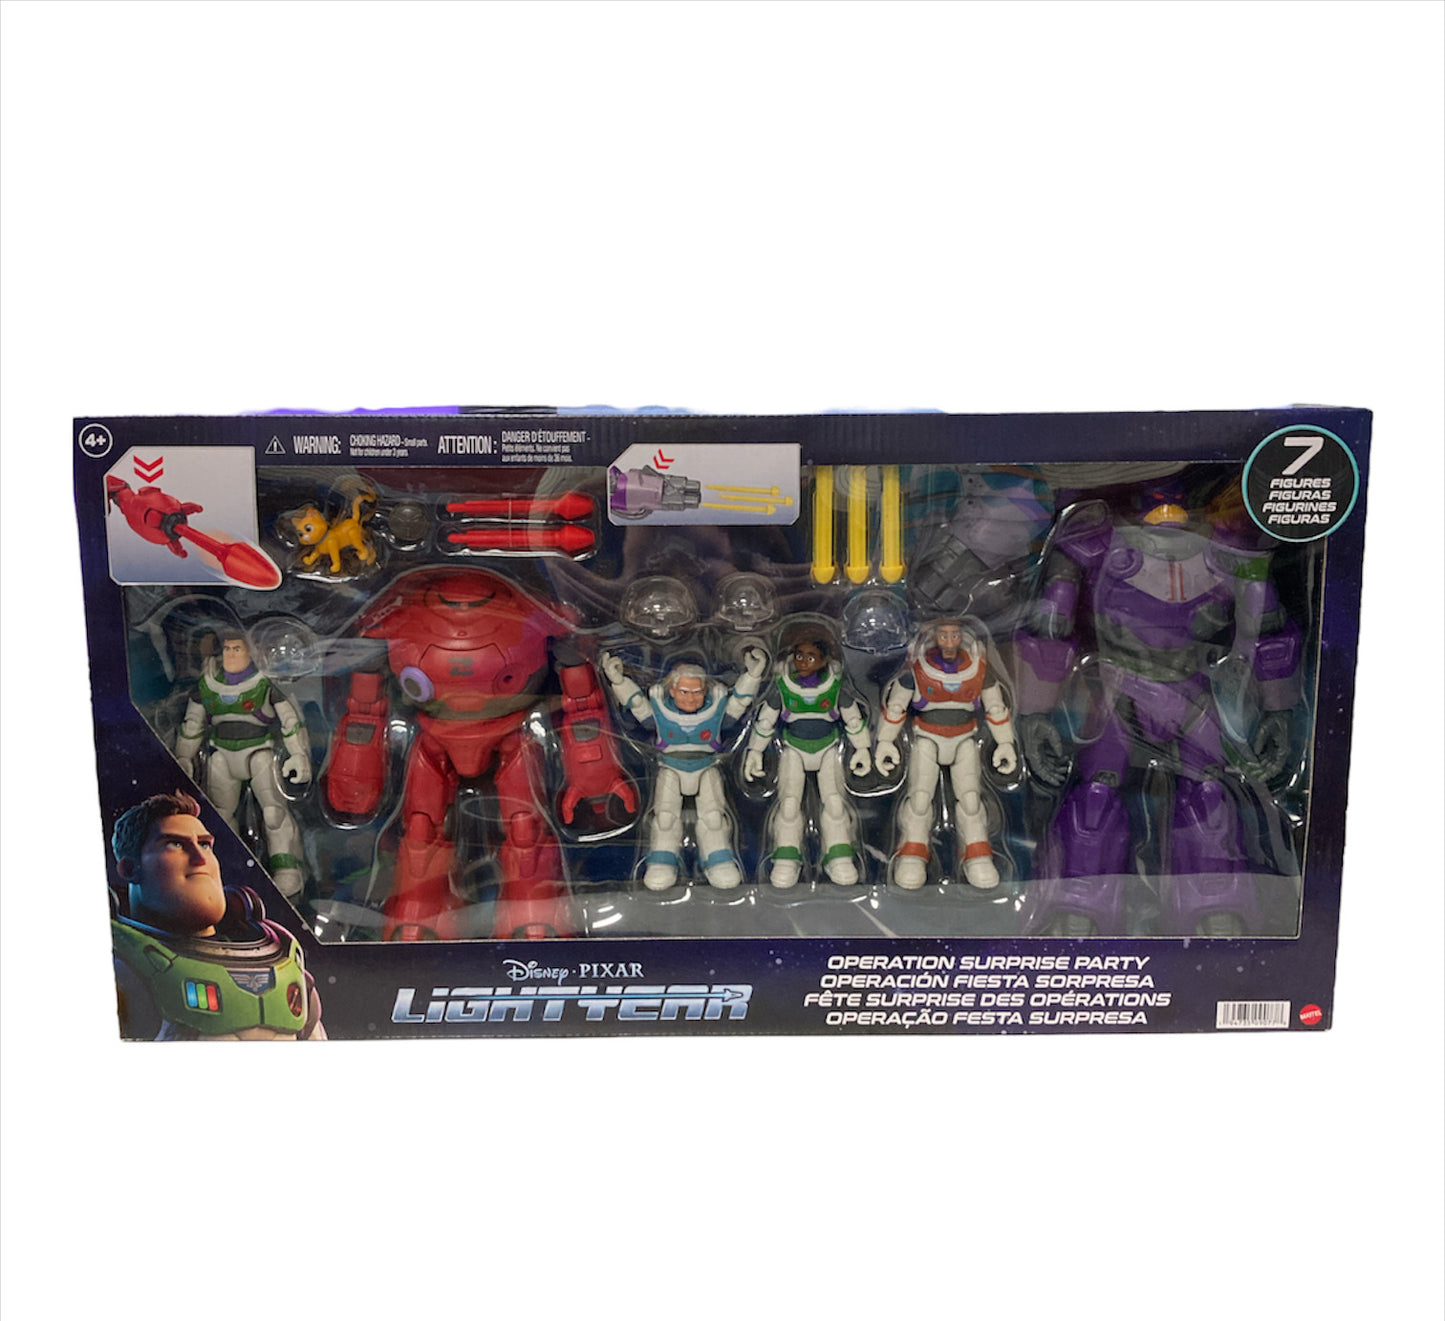 Mattel Disney and Pixar Lightyear Operation Surprise Party Pack